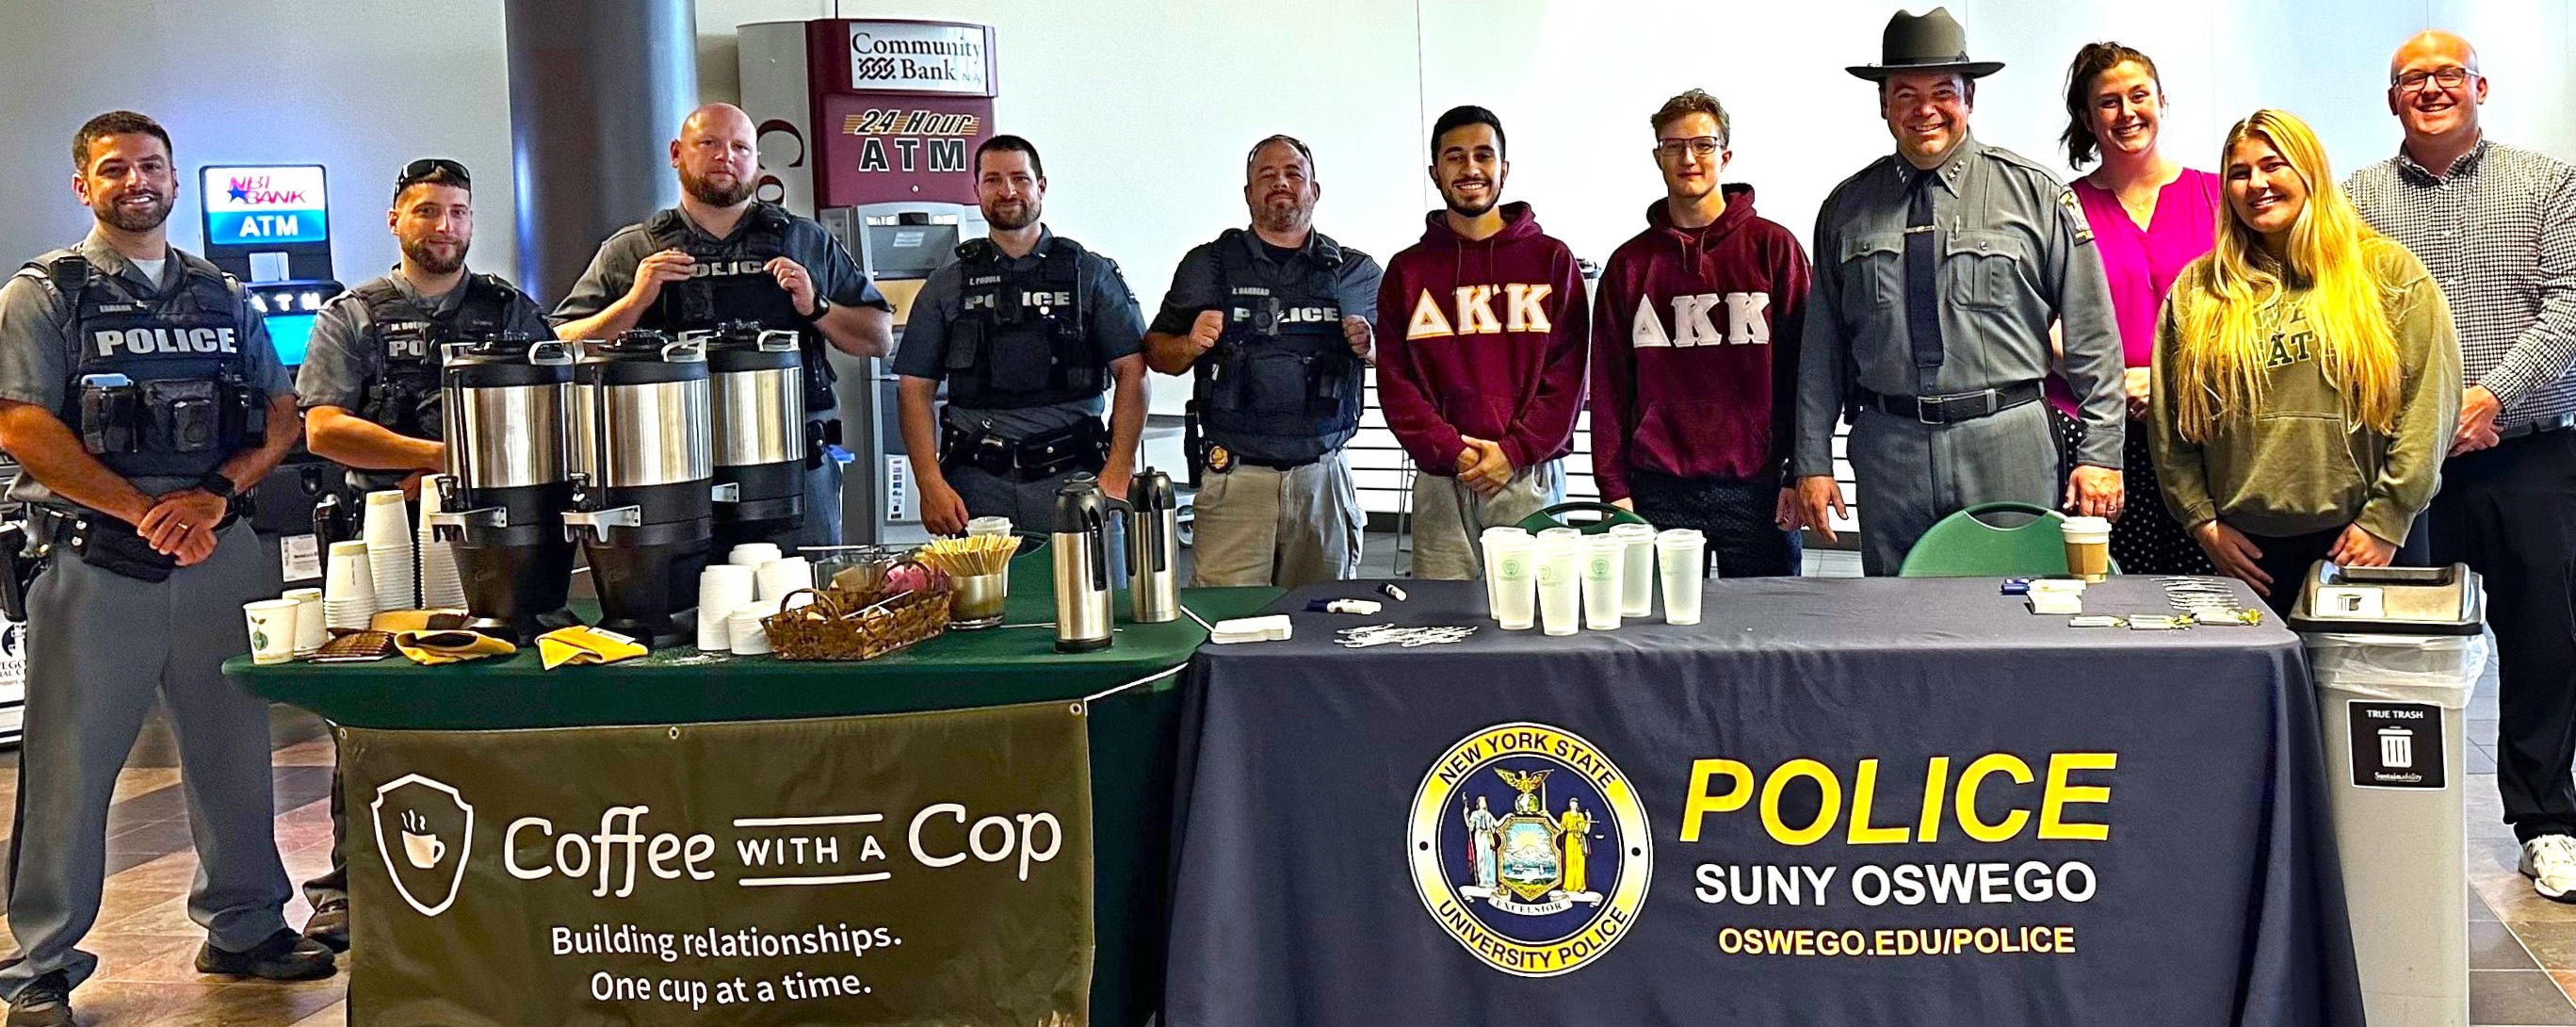 University Police hosted its latest “Coffee with a Cop” outreach session on Oct. 4 on the Marano Campus Center concourse, with more than 100 students, faculty and staff stopping by the tables.